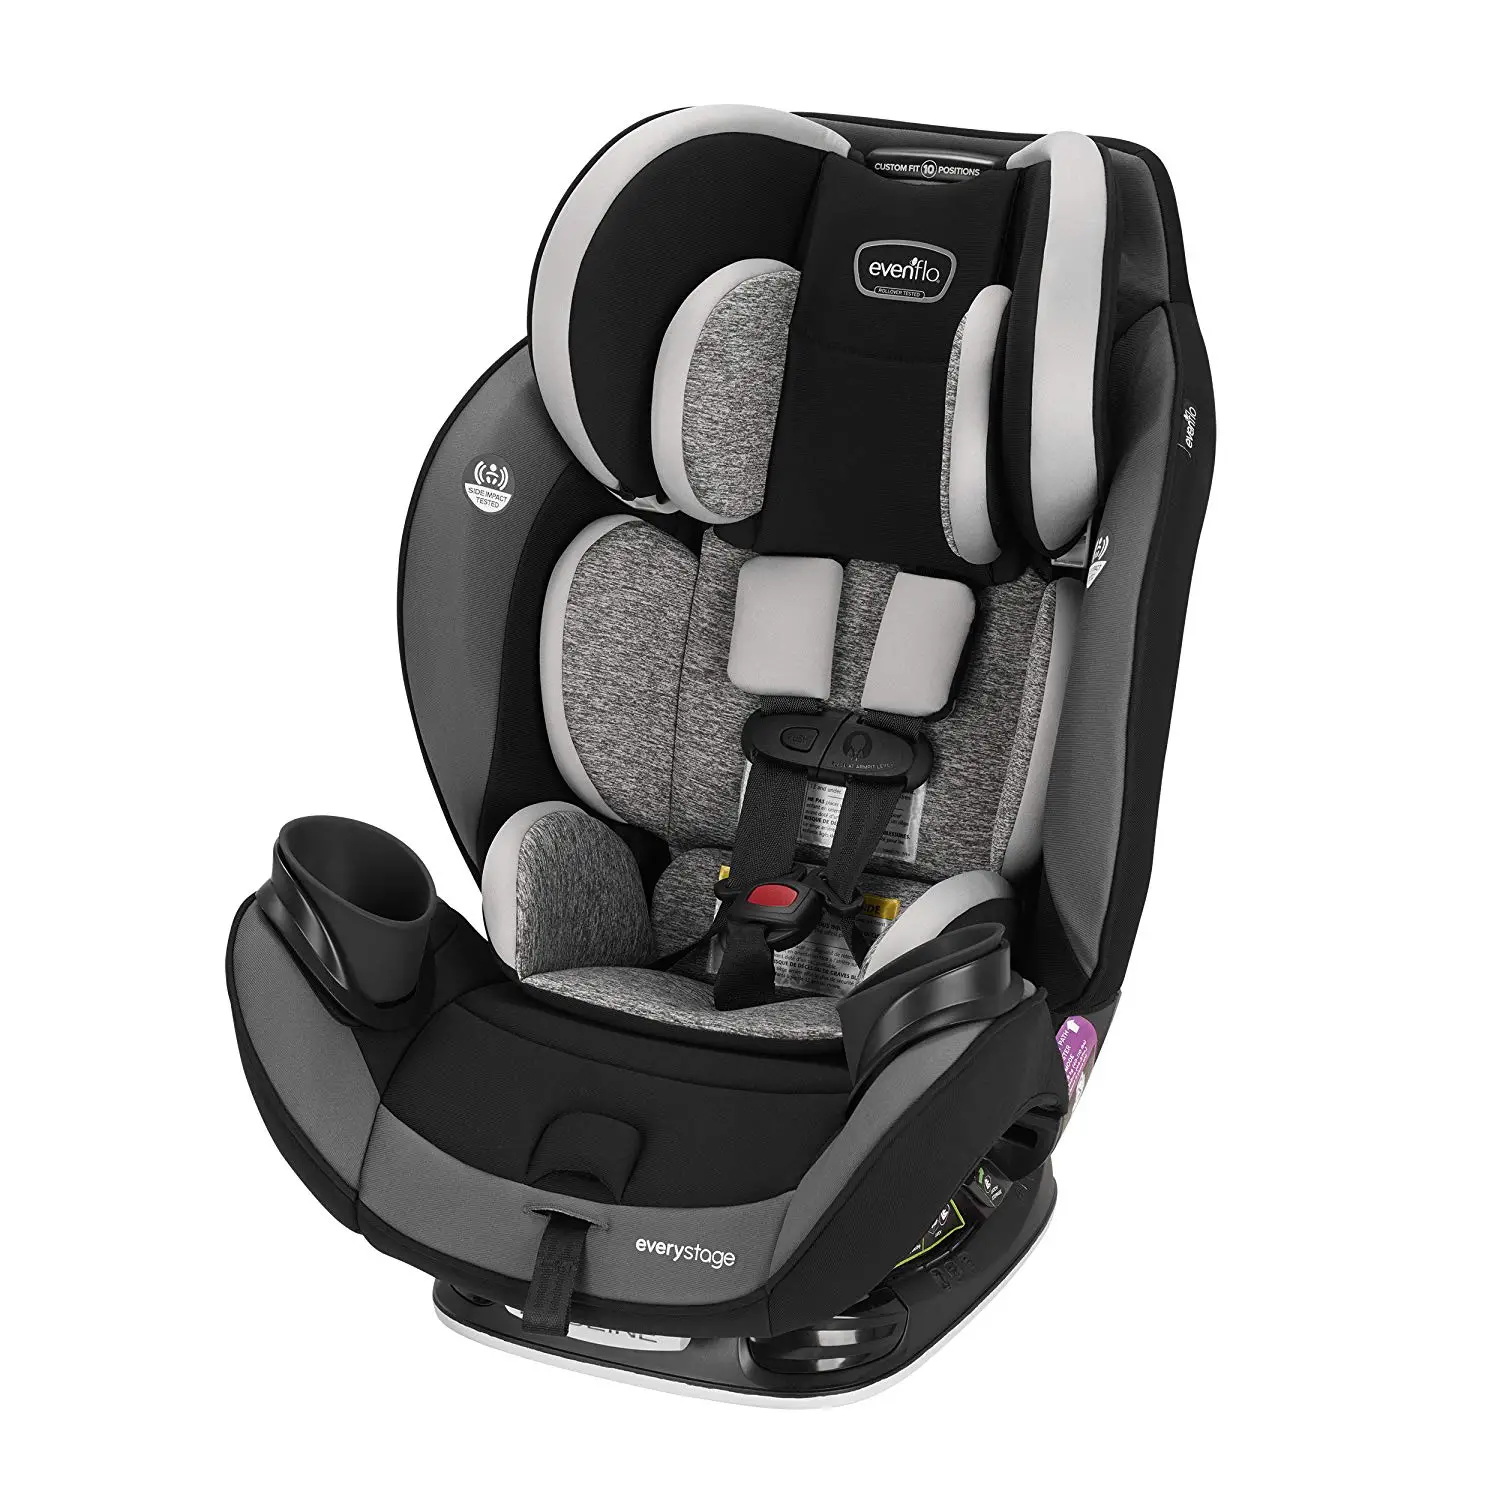 Evenflo EveryStage DLX All-in-one Car Seat